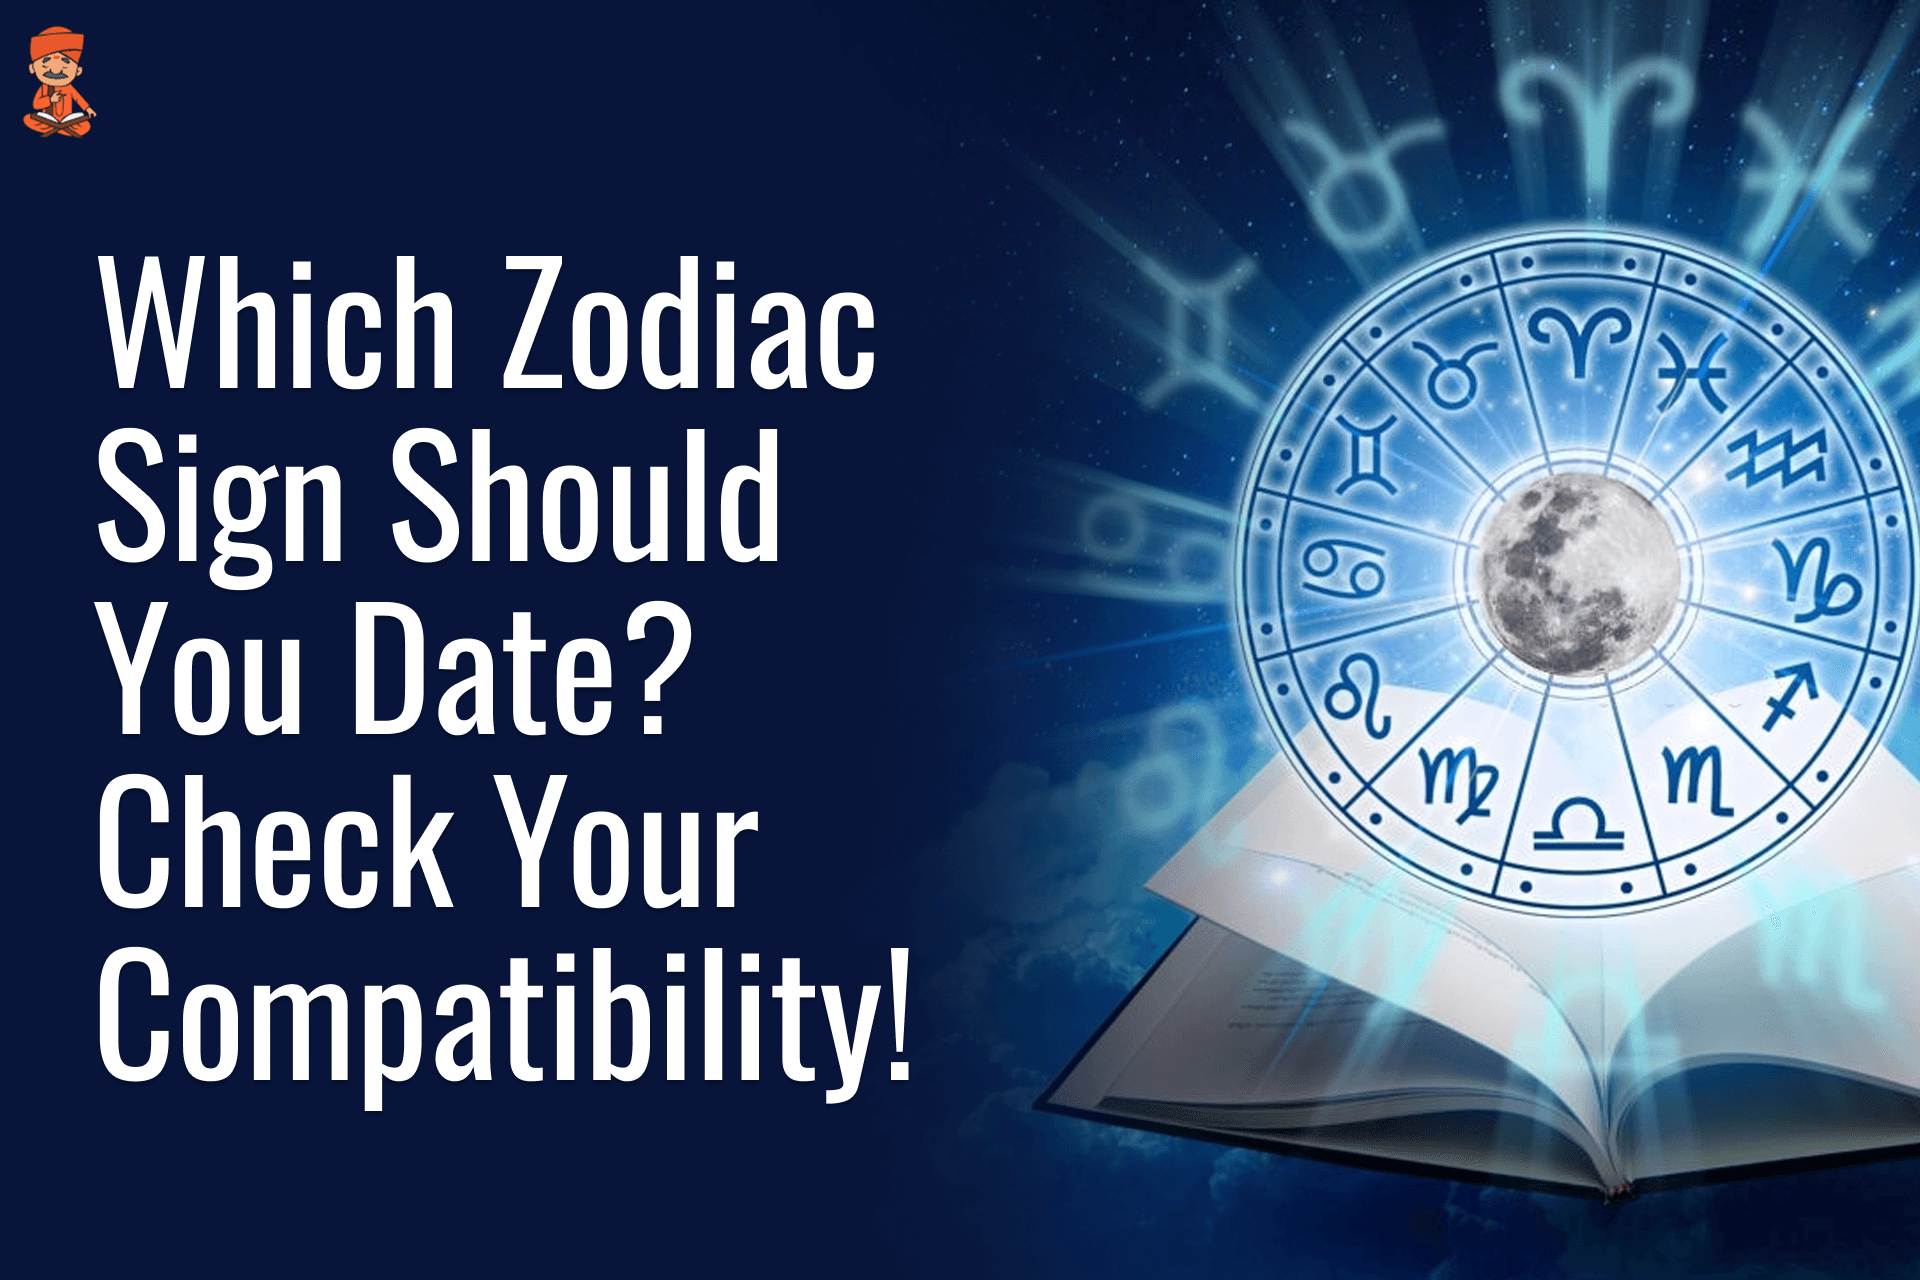 Which Zodiac Sign Should You Date? Check Your Compatibility!